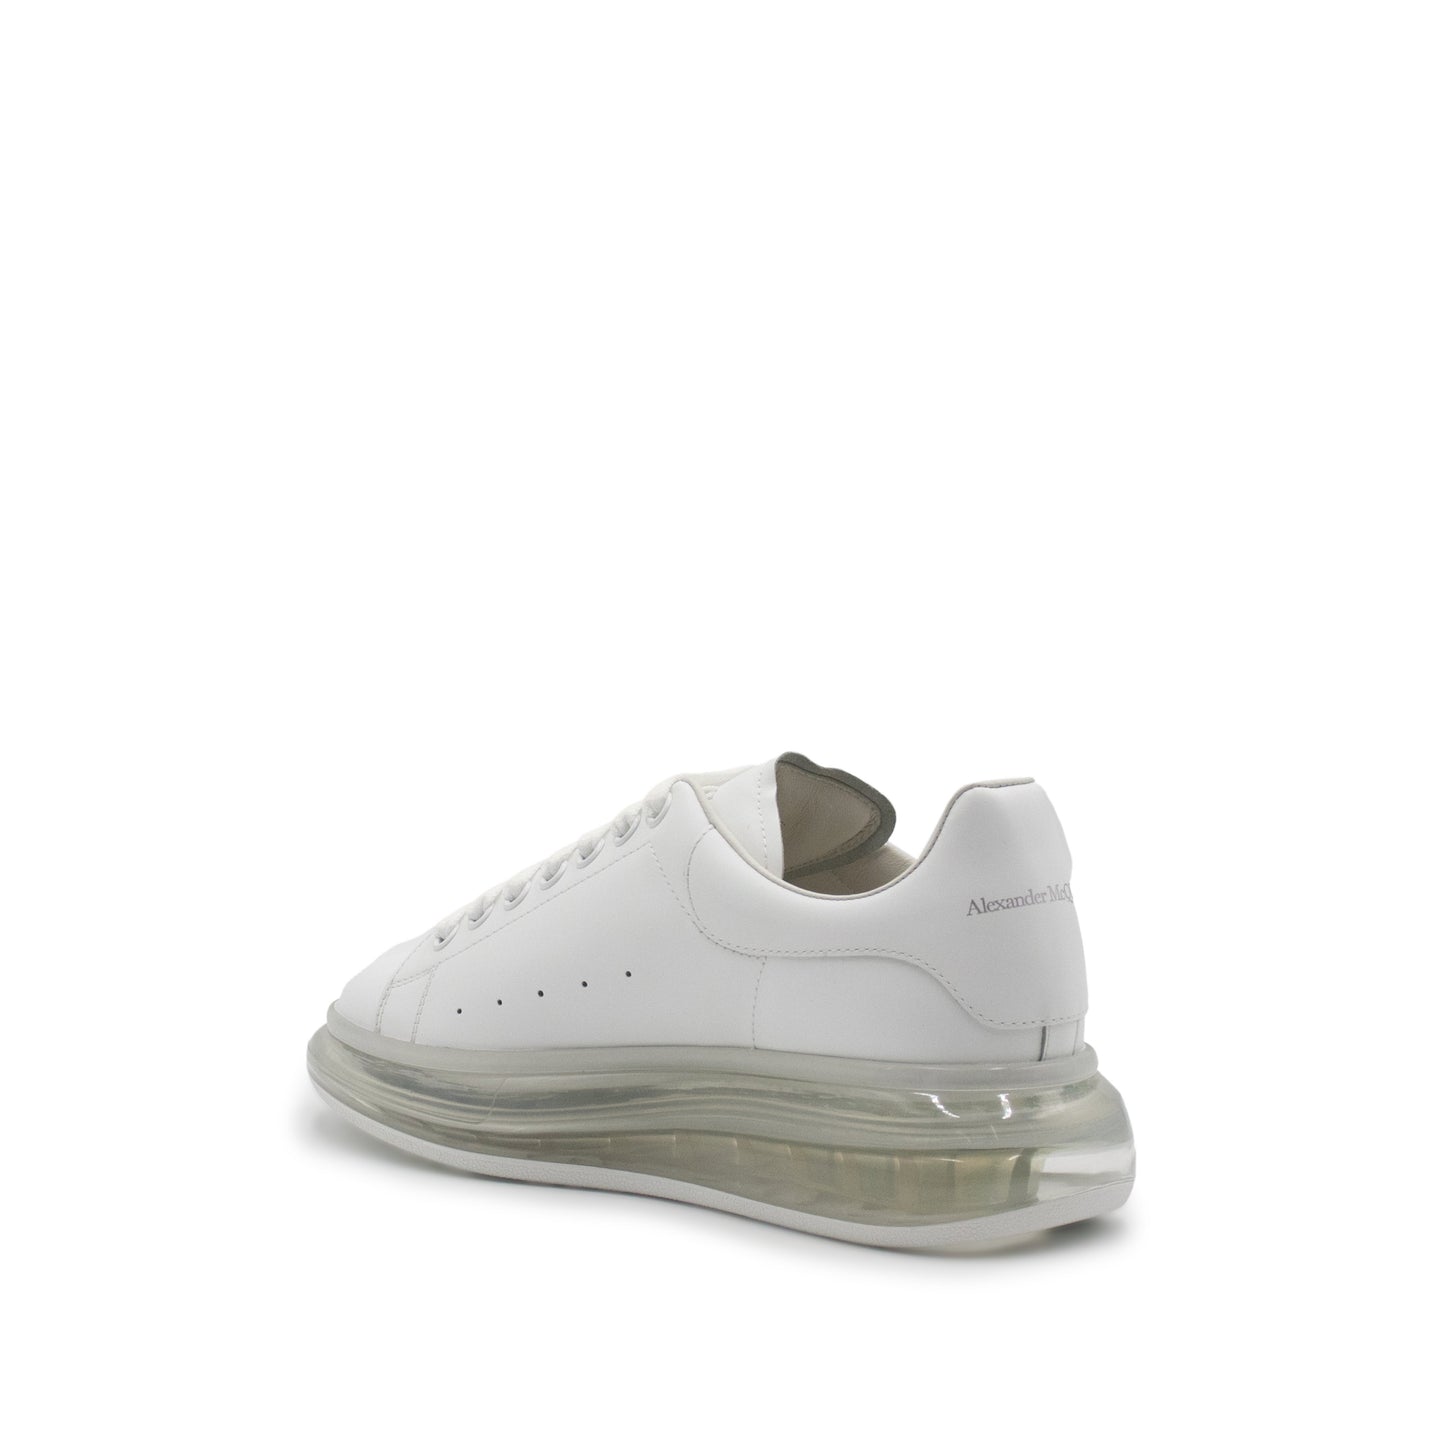 Larry Transparent Sole Sneaker in White/White